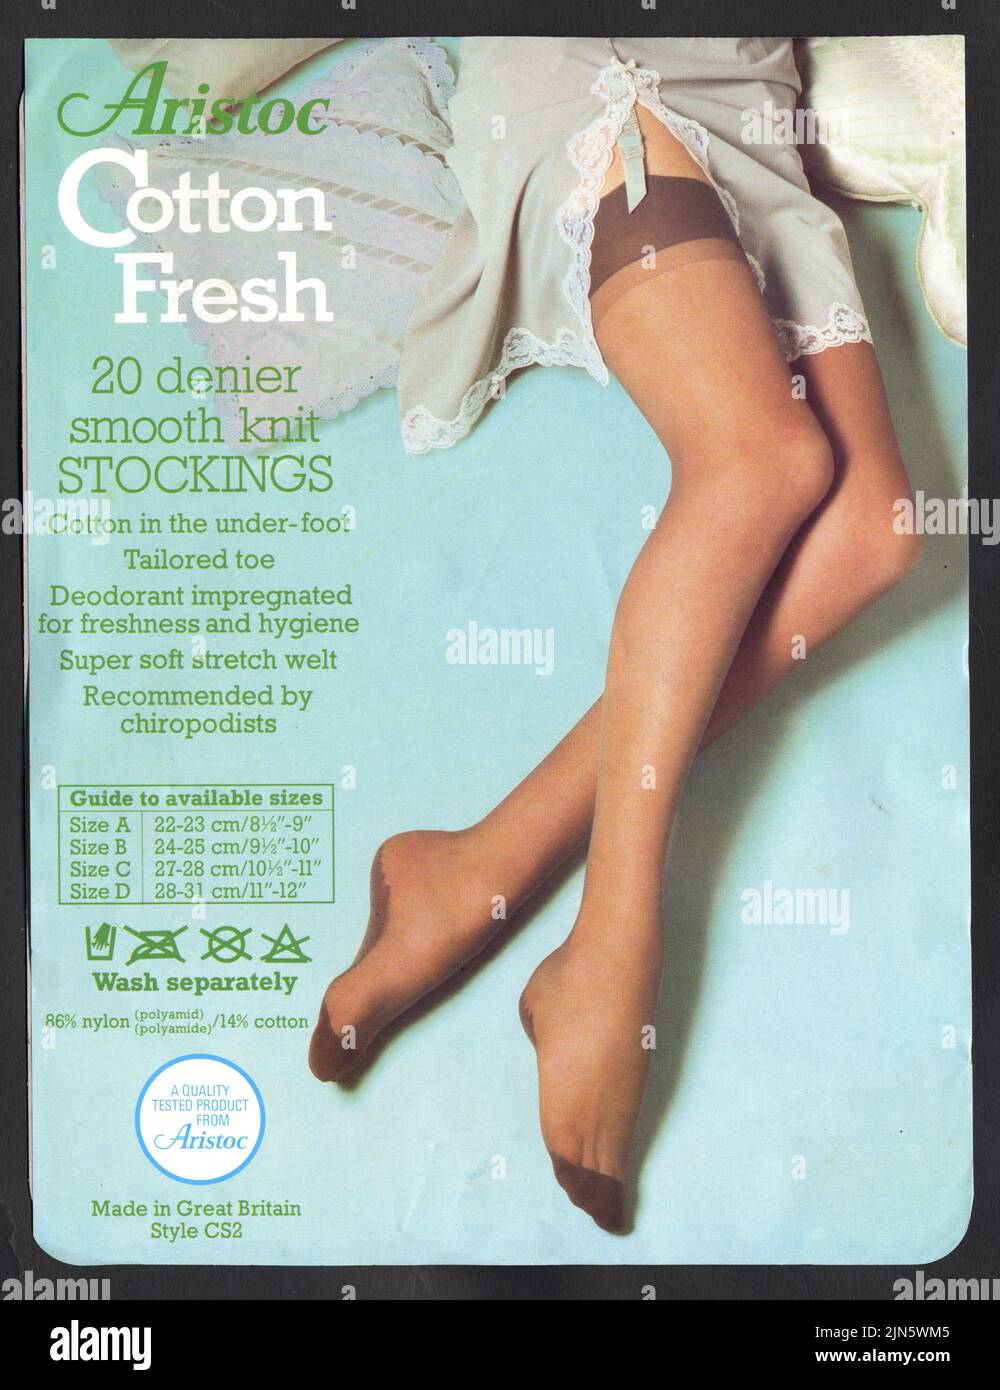 Aristoc Cotton Fresh stockings packet. Legs and nightdress. 1980s. Made in Great Britain. Original scan. Stock Photo